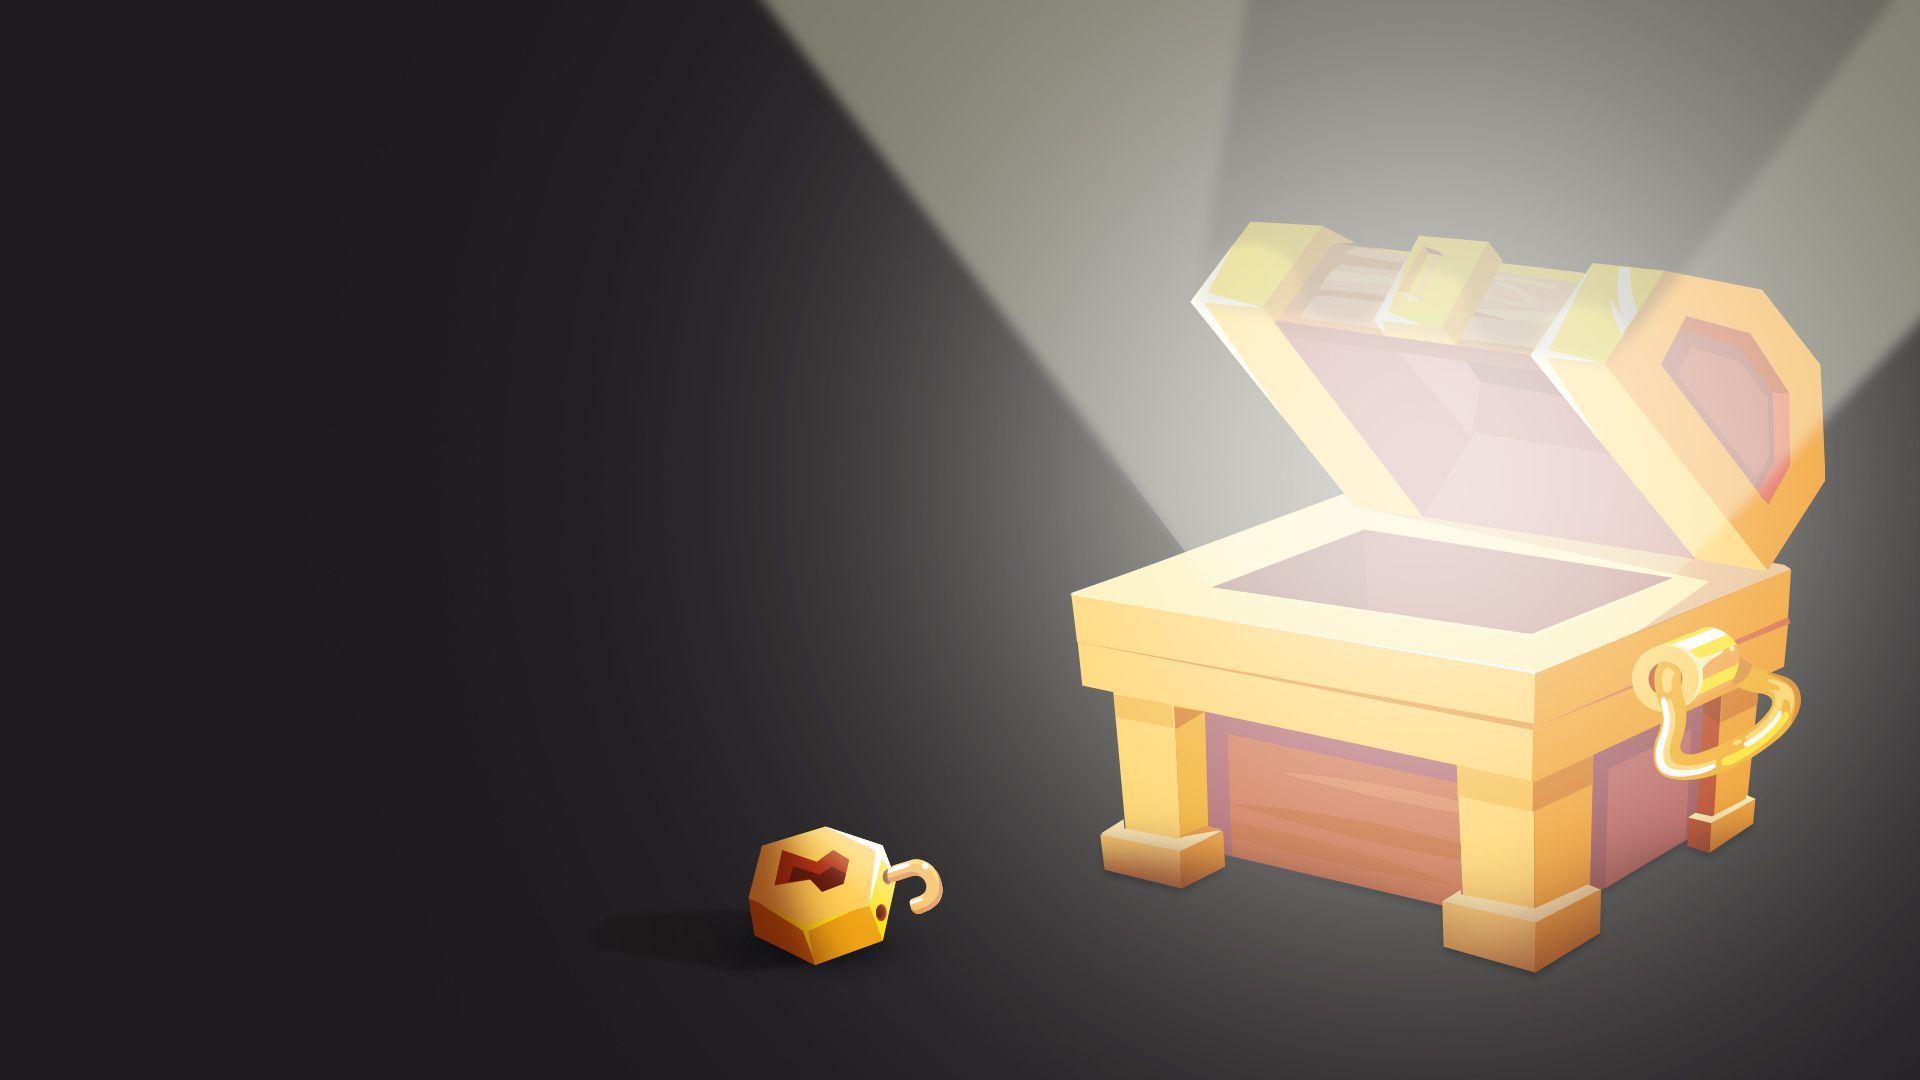 An illustration of an open treasure chest.